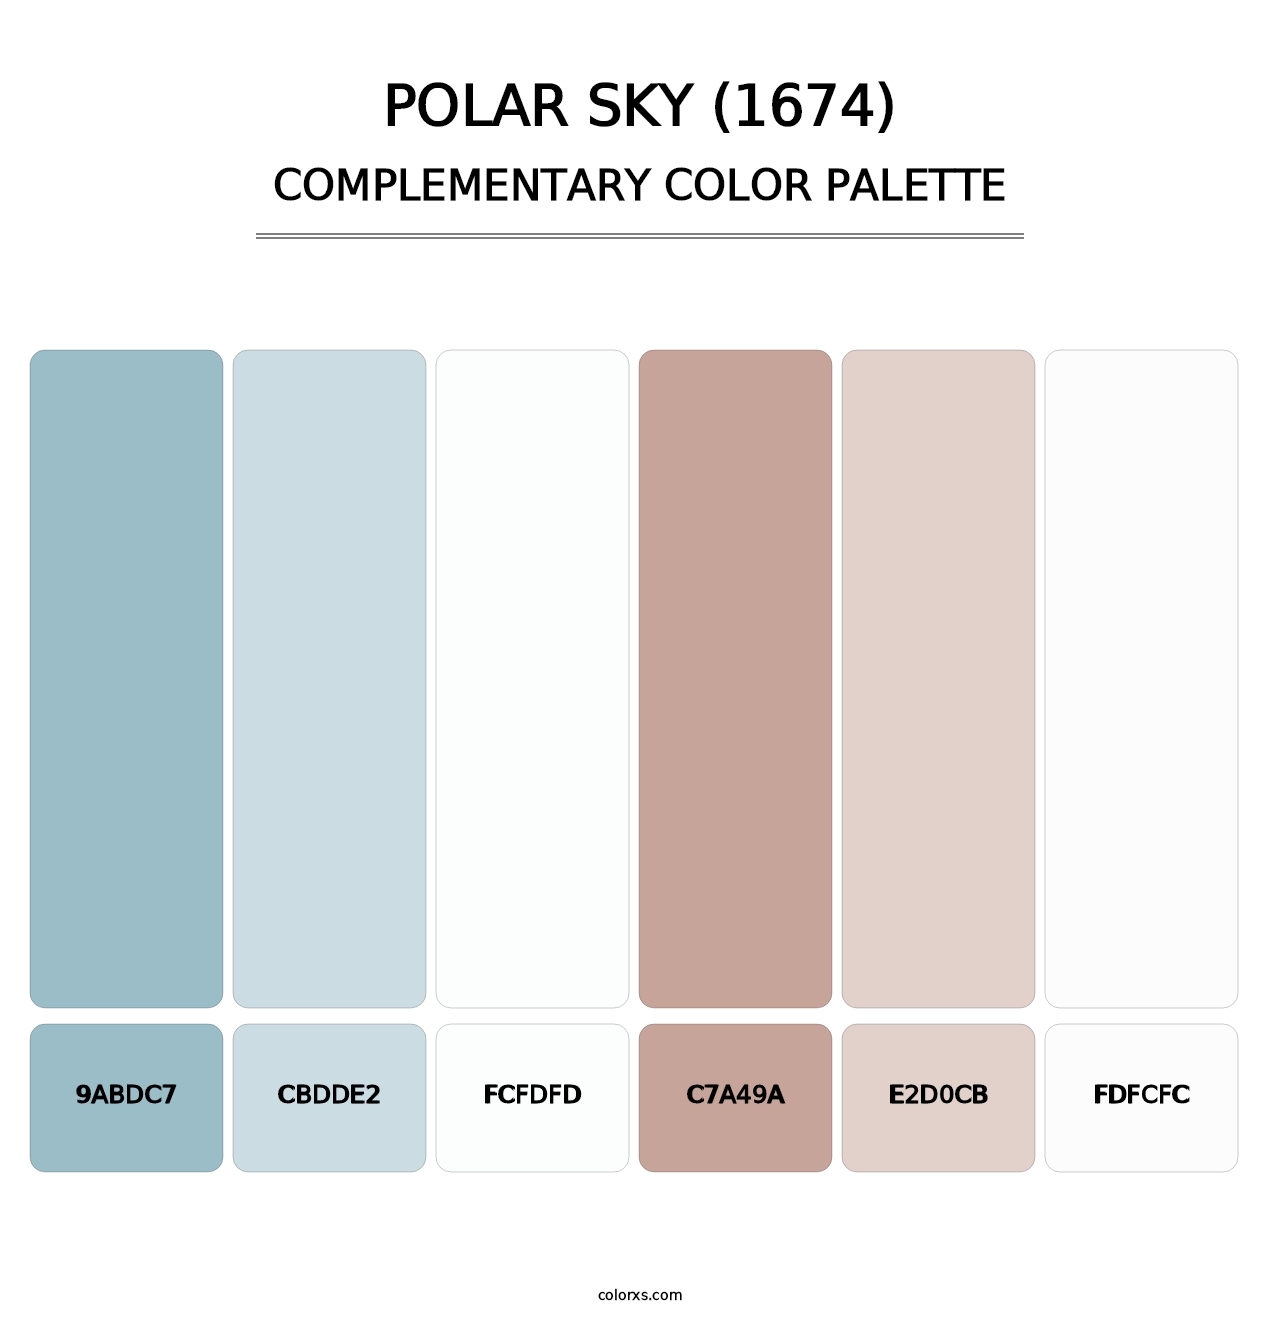 Polar Sky (1674) - Complementary Color Palette